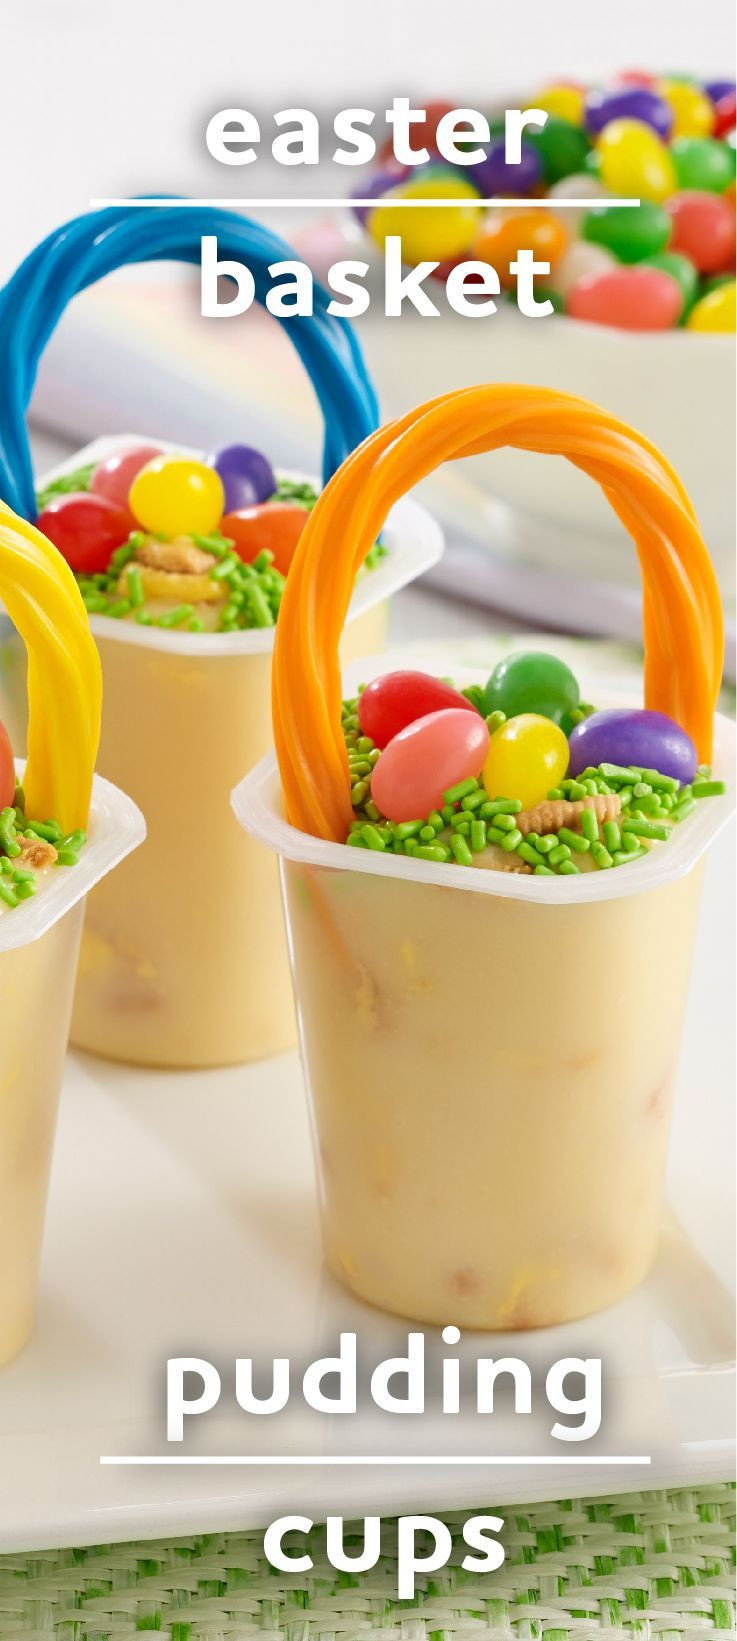 Quick And Easy Easter Desserts
 Easter Basket Pudding Cups Recipe